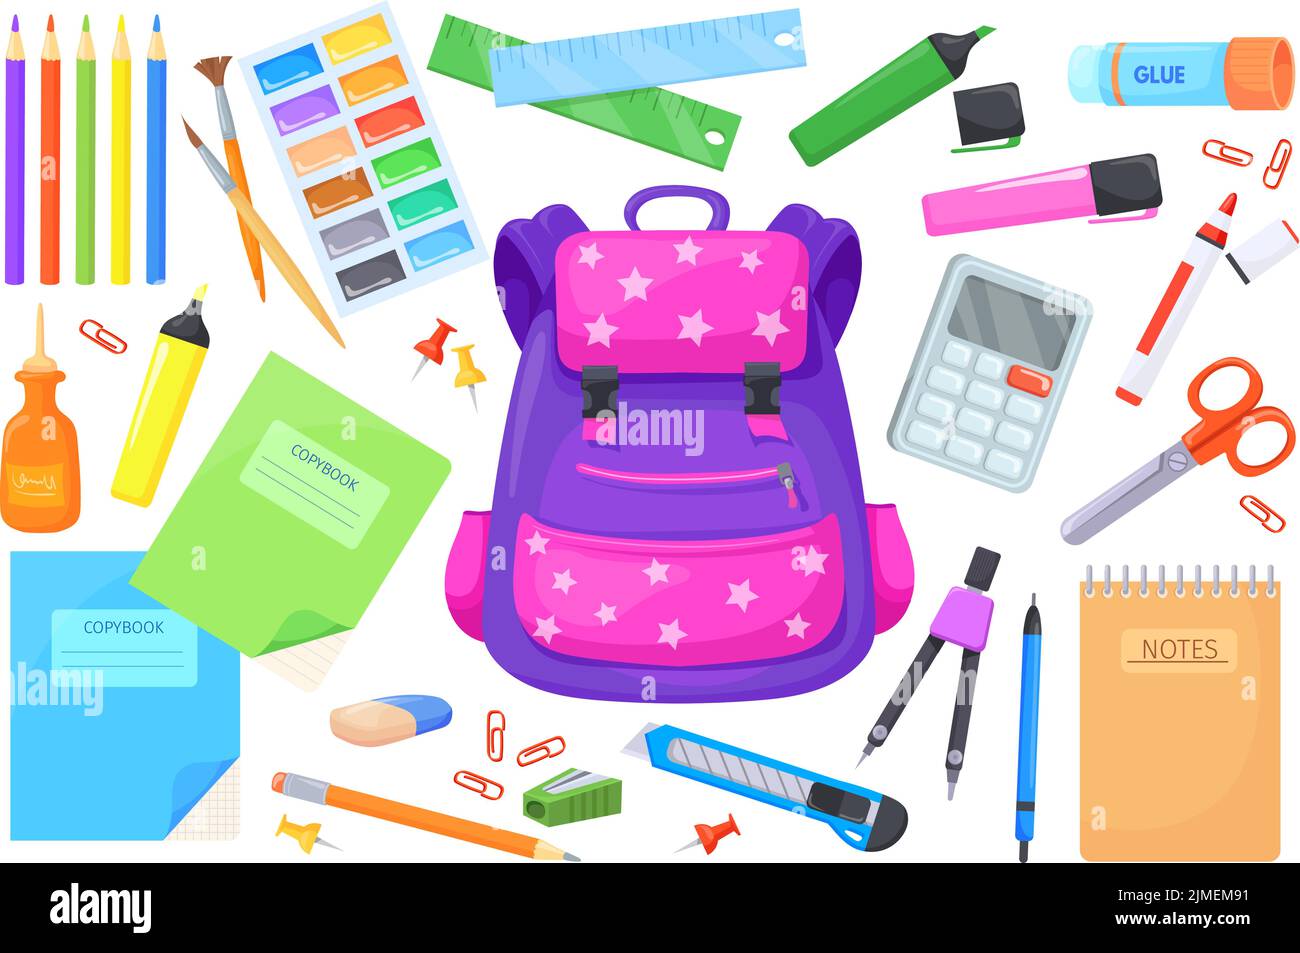 Schoolbag supplies. Innovative school stationery kids learning, itemized object tiny accessories cartoon satchel paint stationary calculator paper pencil, vector illustration of education schoolbag Stock Vector